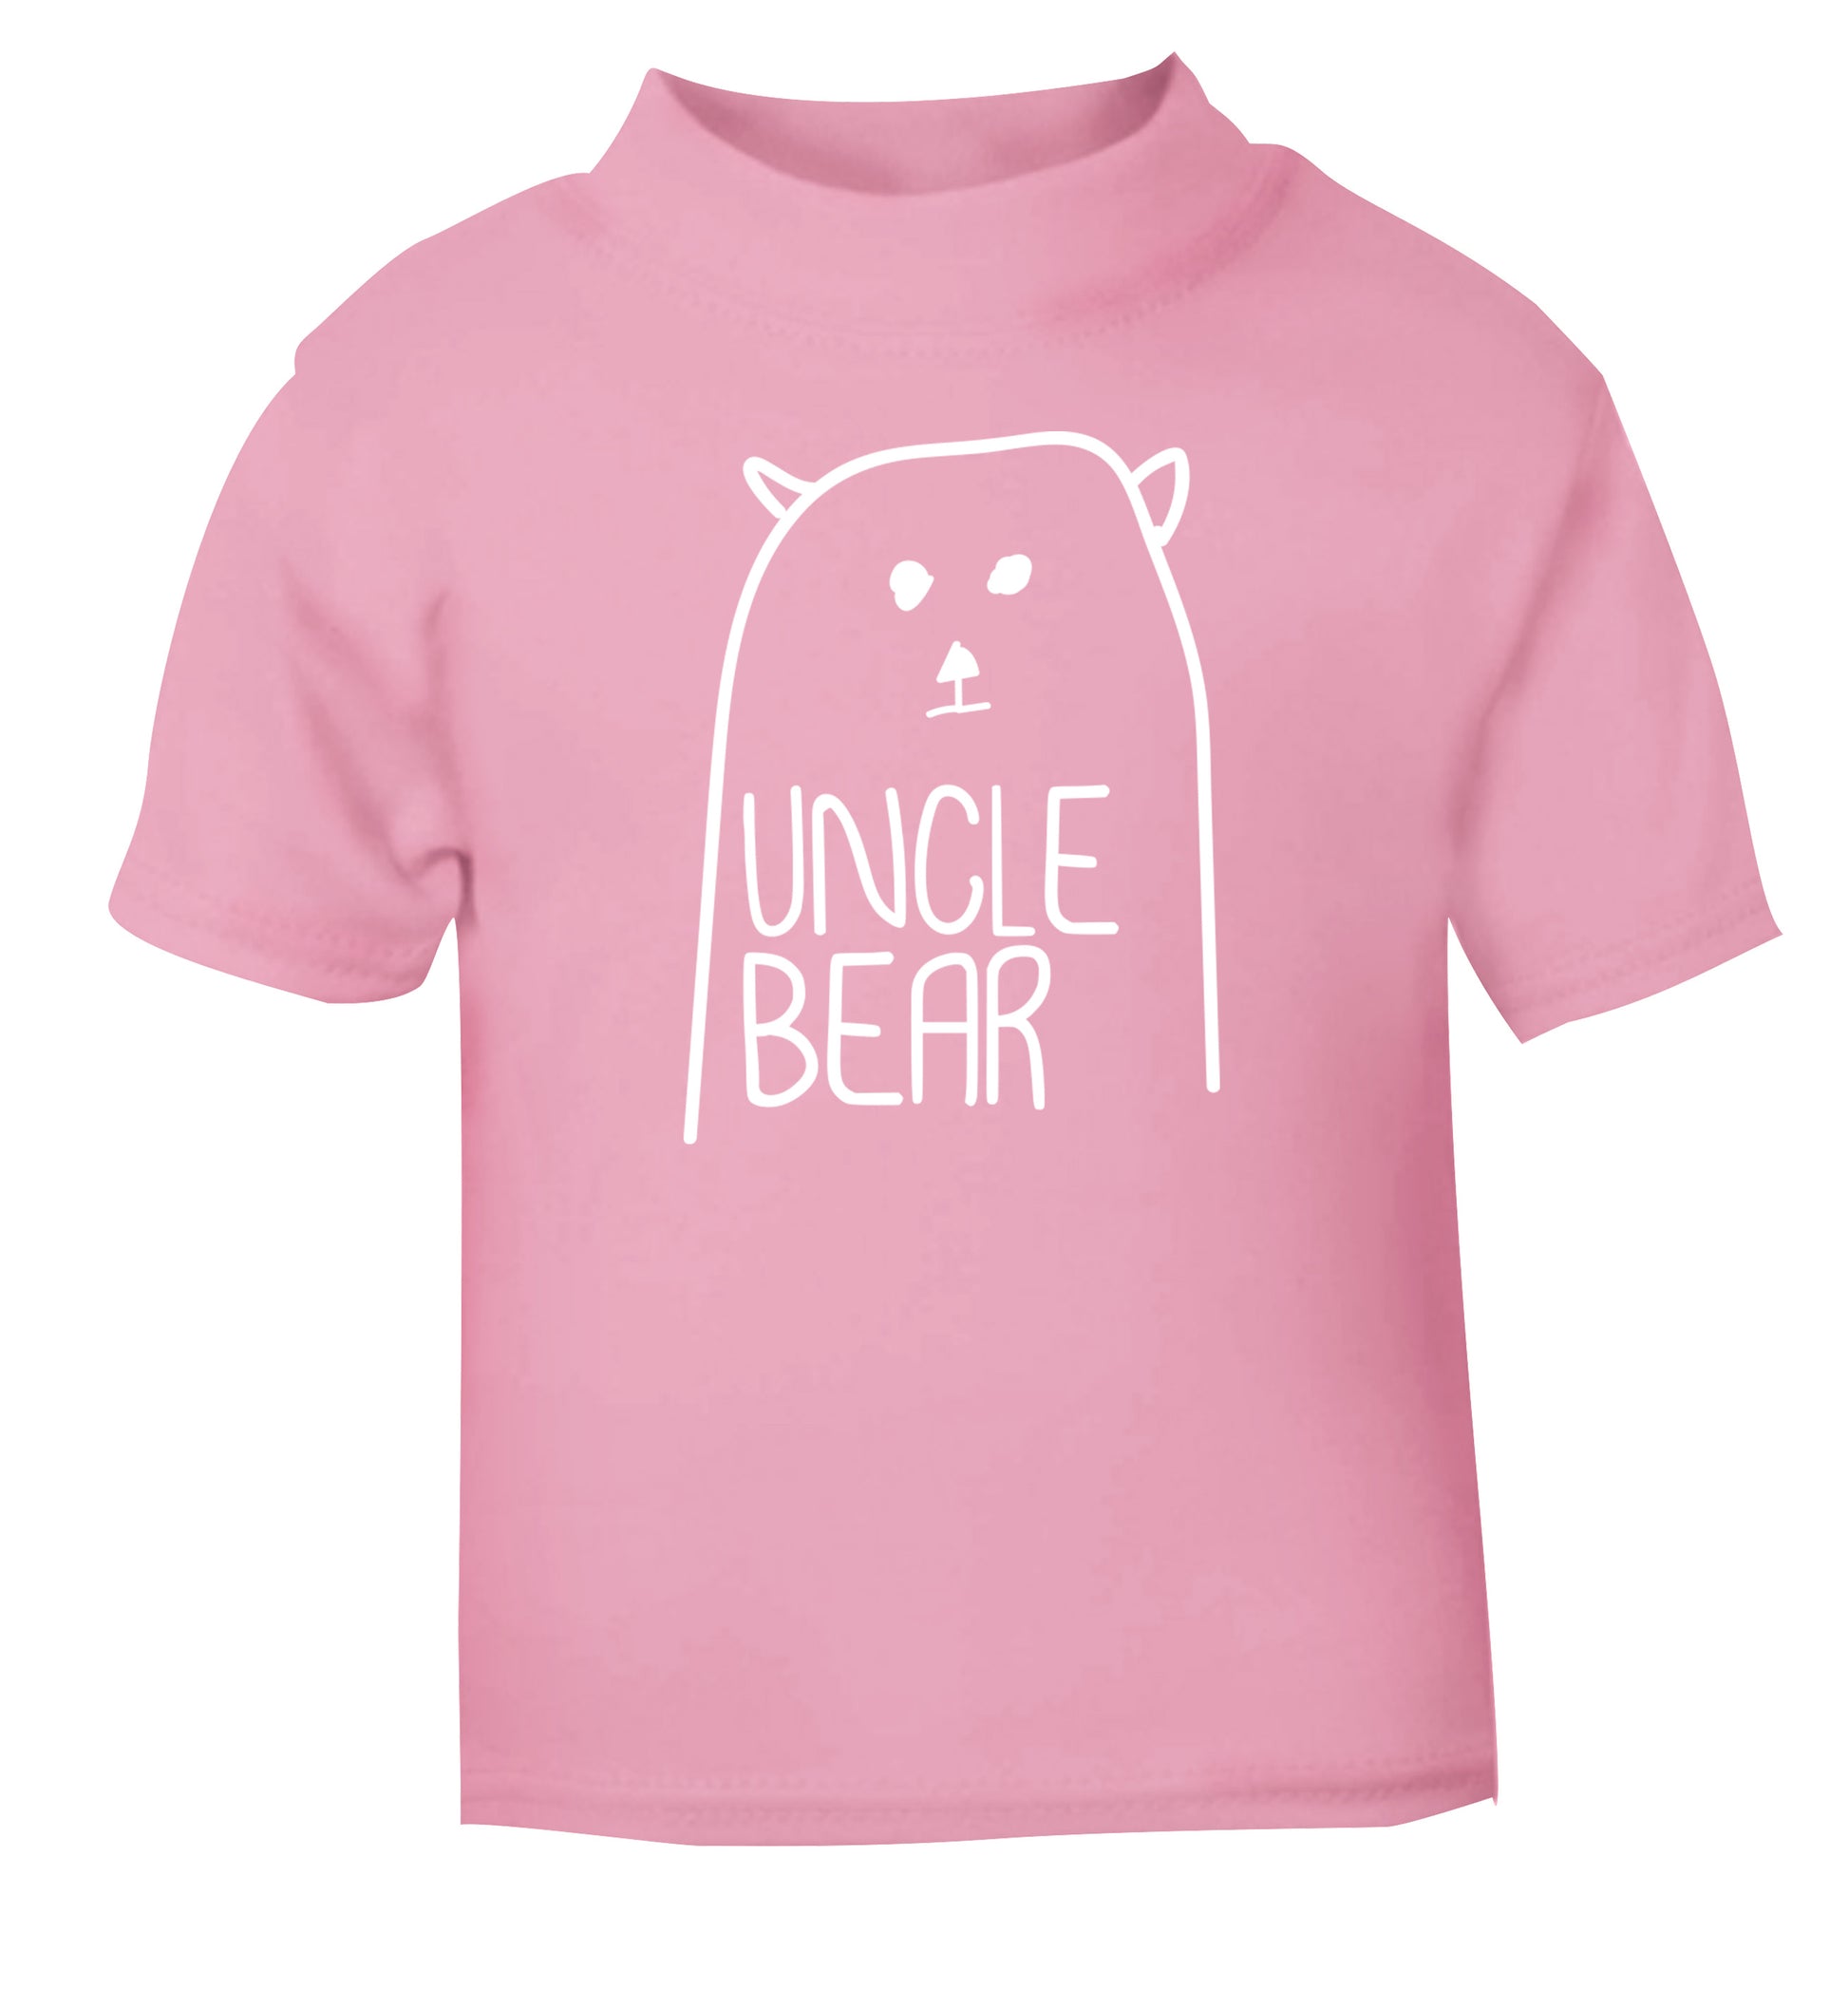 Uncle bear light pink Baby Toddler Tshirt 2 Years